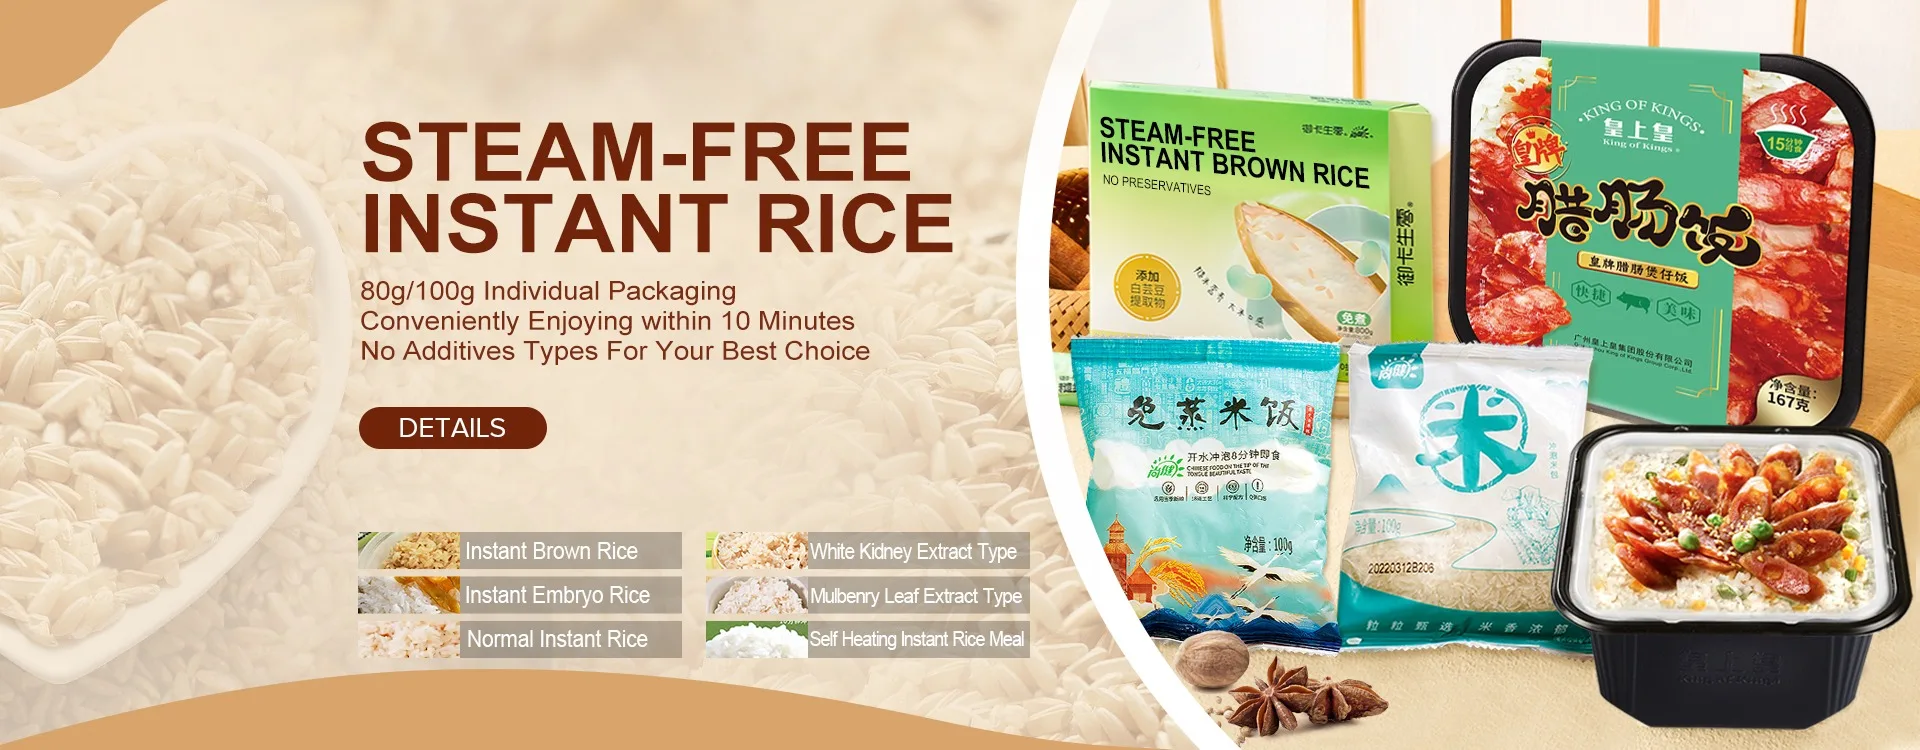 Instant rice products